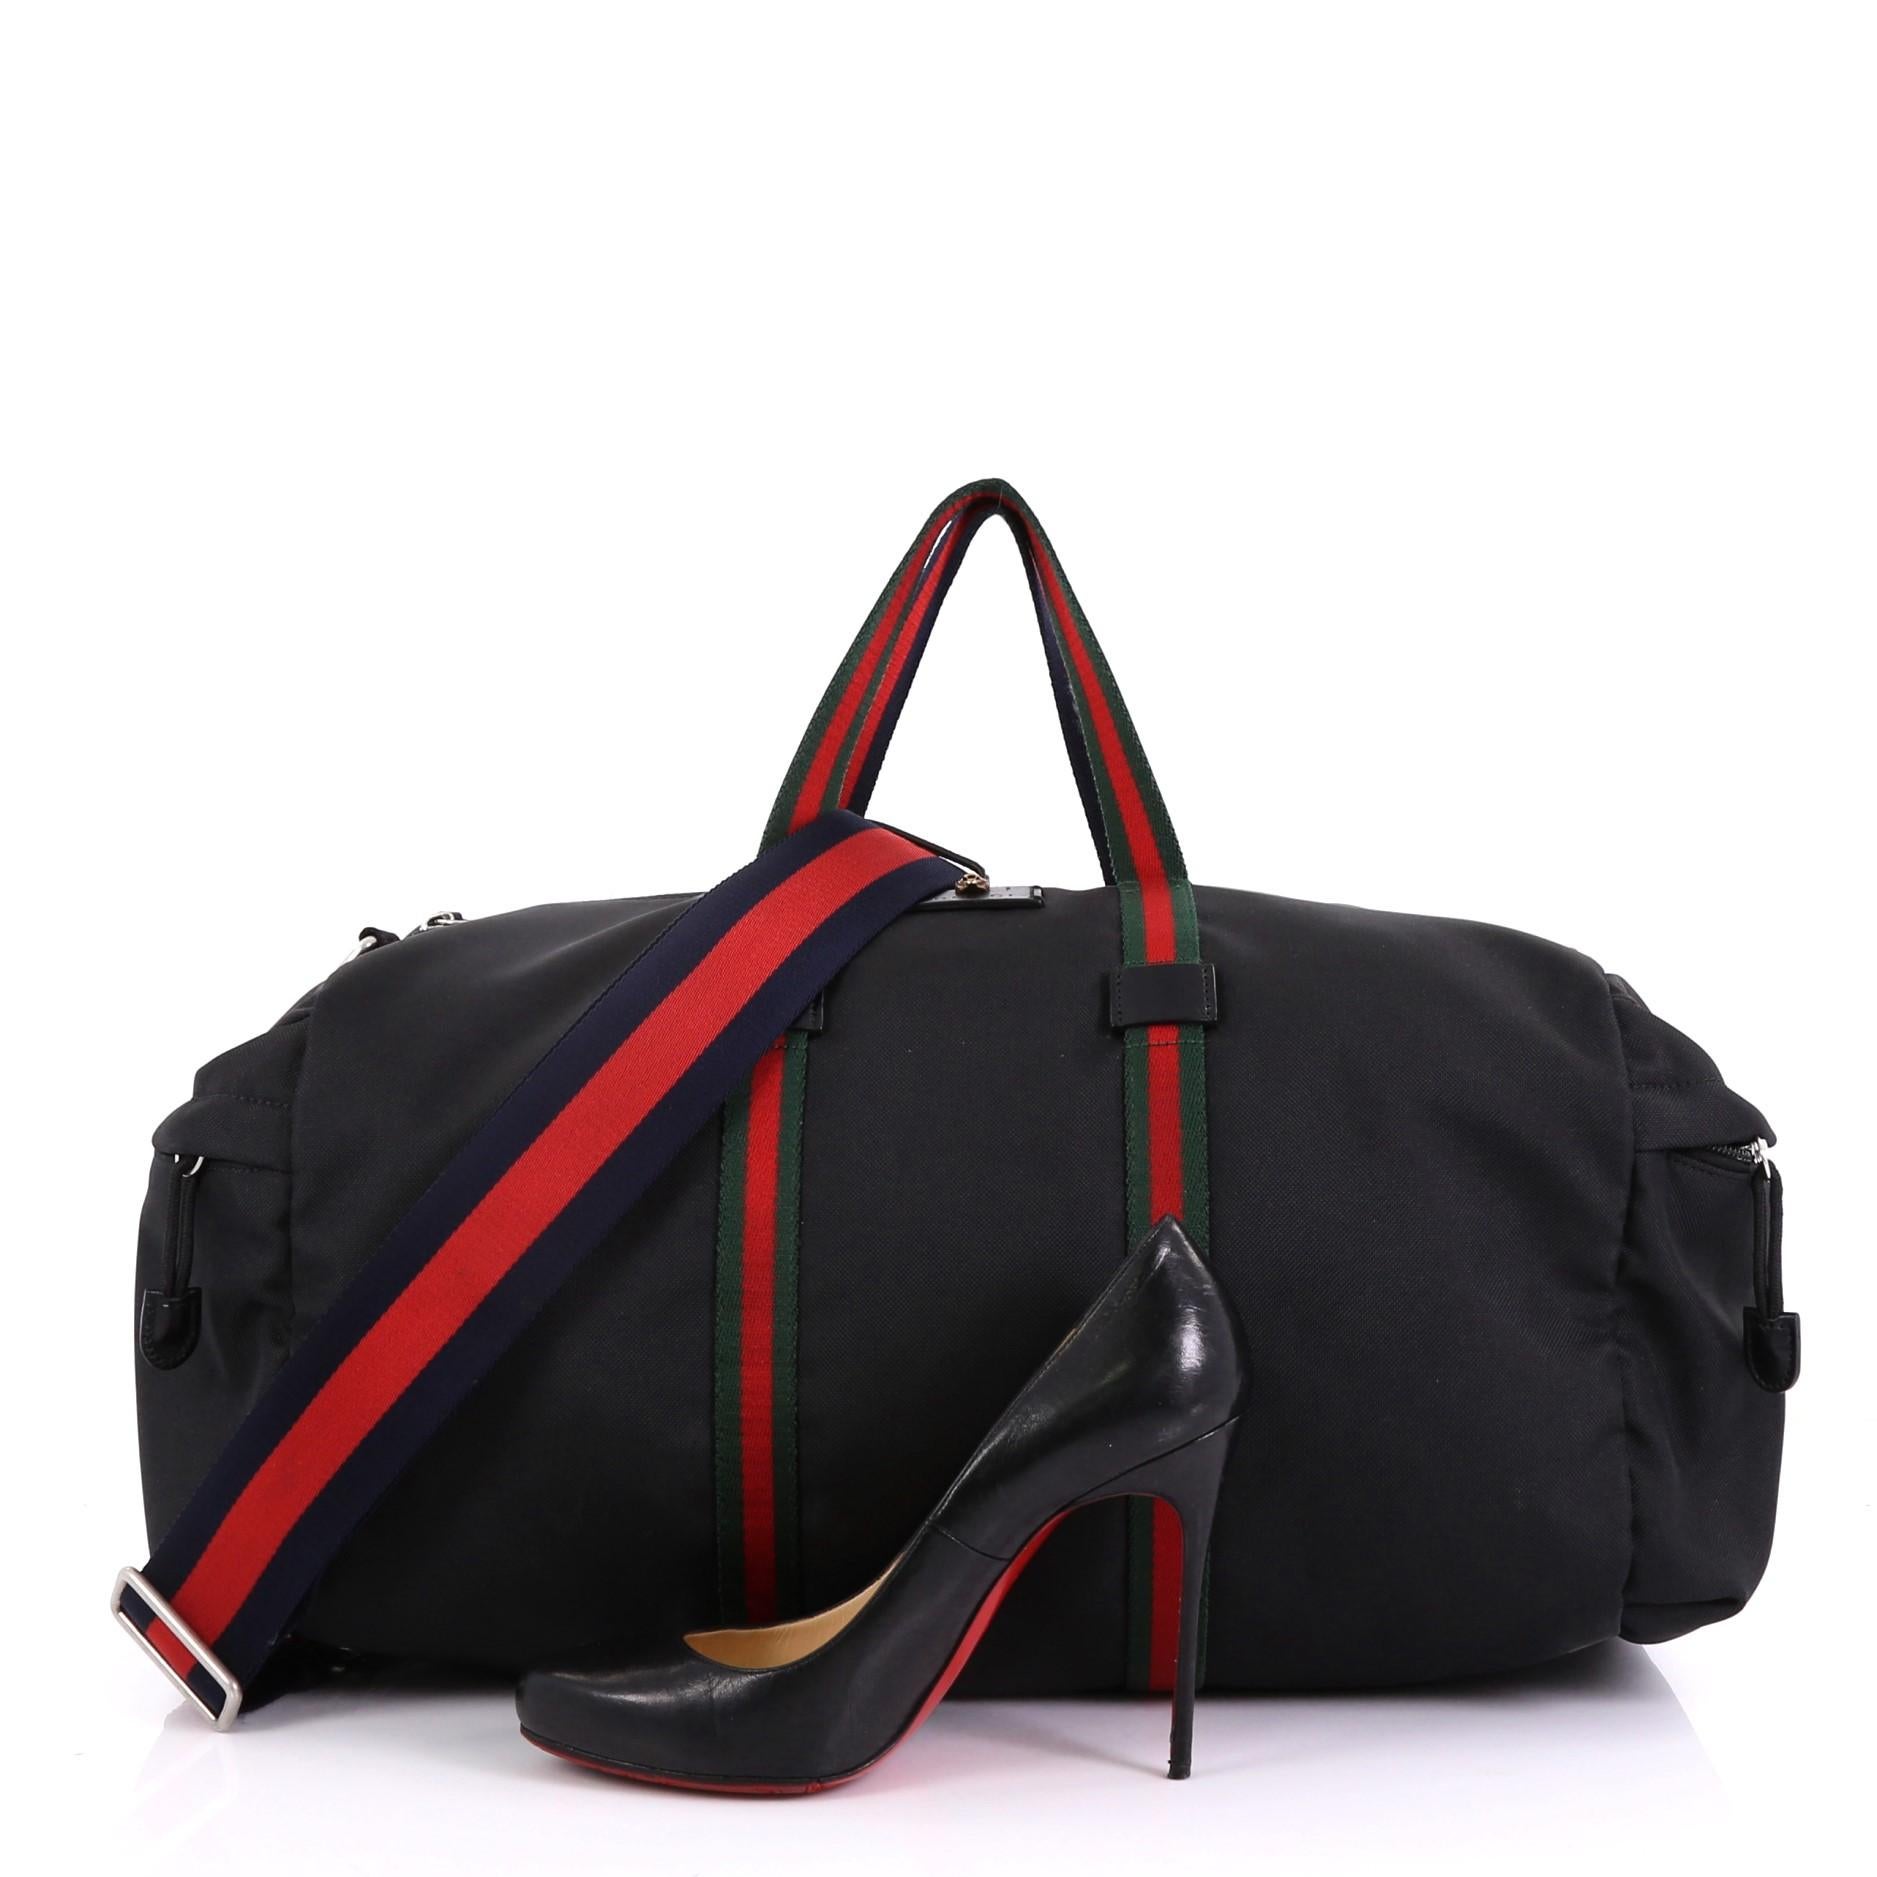 This Gucci Technical Duffle Bag Techno Canvas Large, crafted in black canvas, features green and red canvas top handles with blue and red on the opposite side, black leather trim, and aged silver-tone hardware. Its zip closure opens to a black nylon